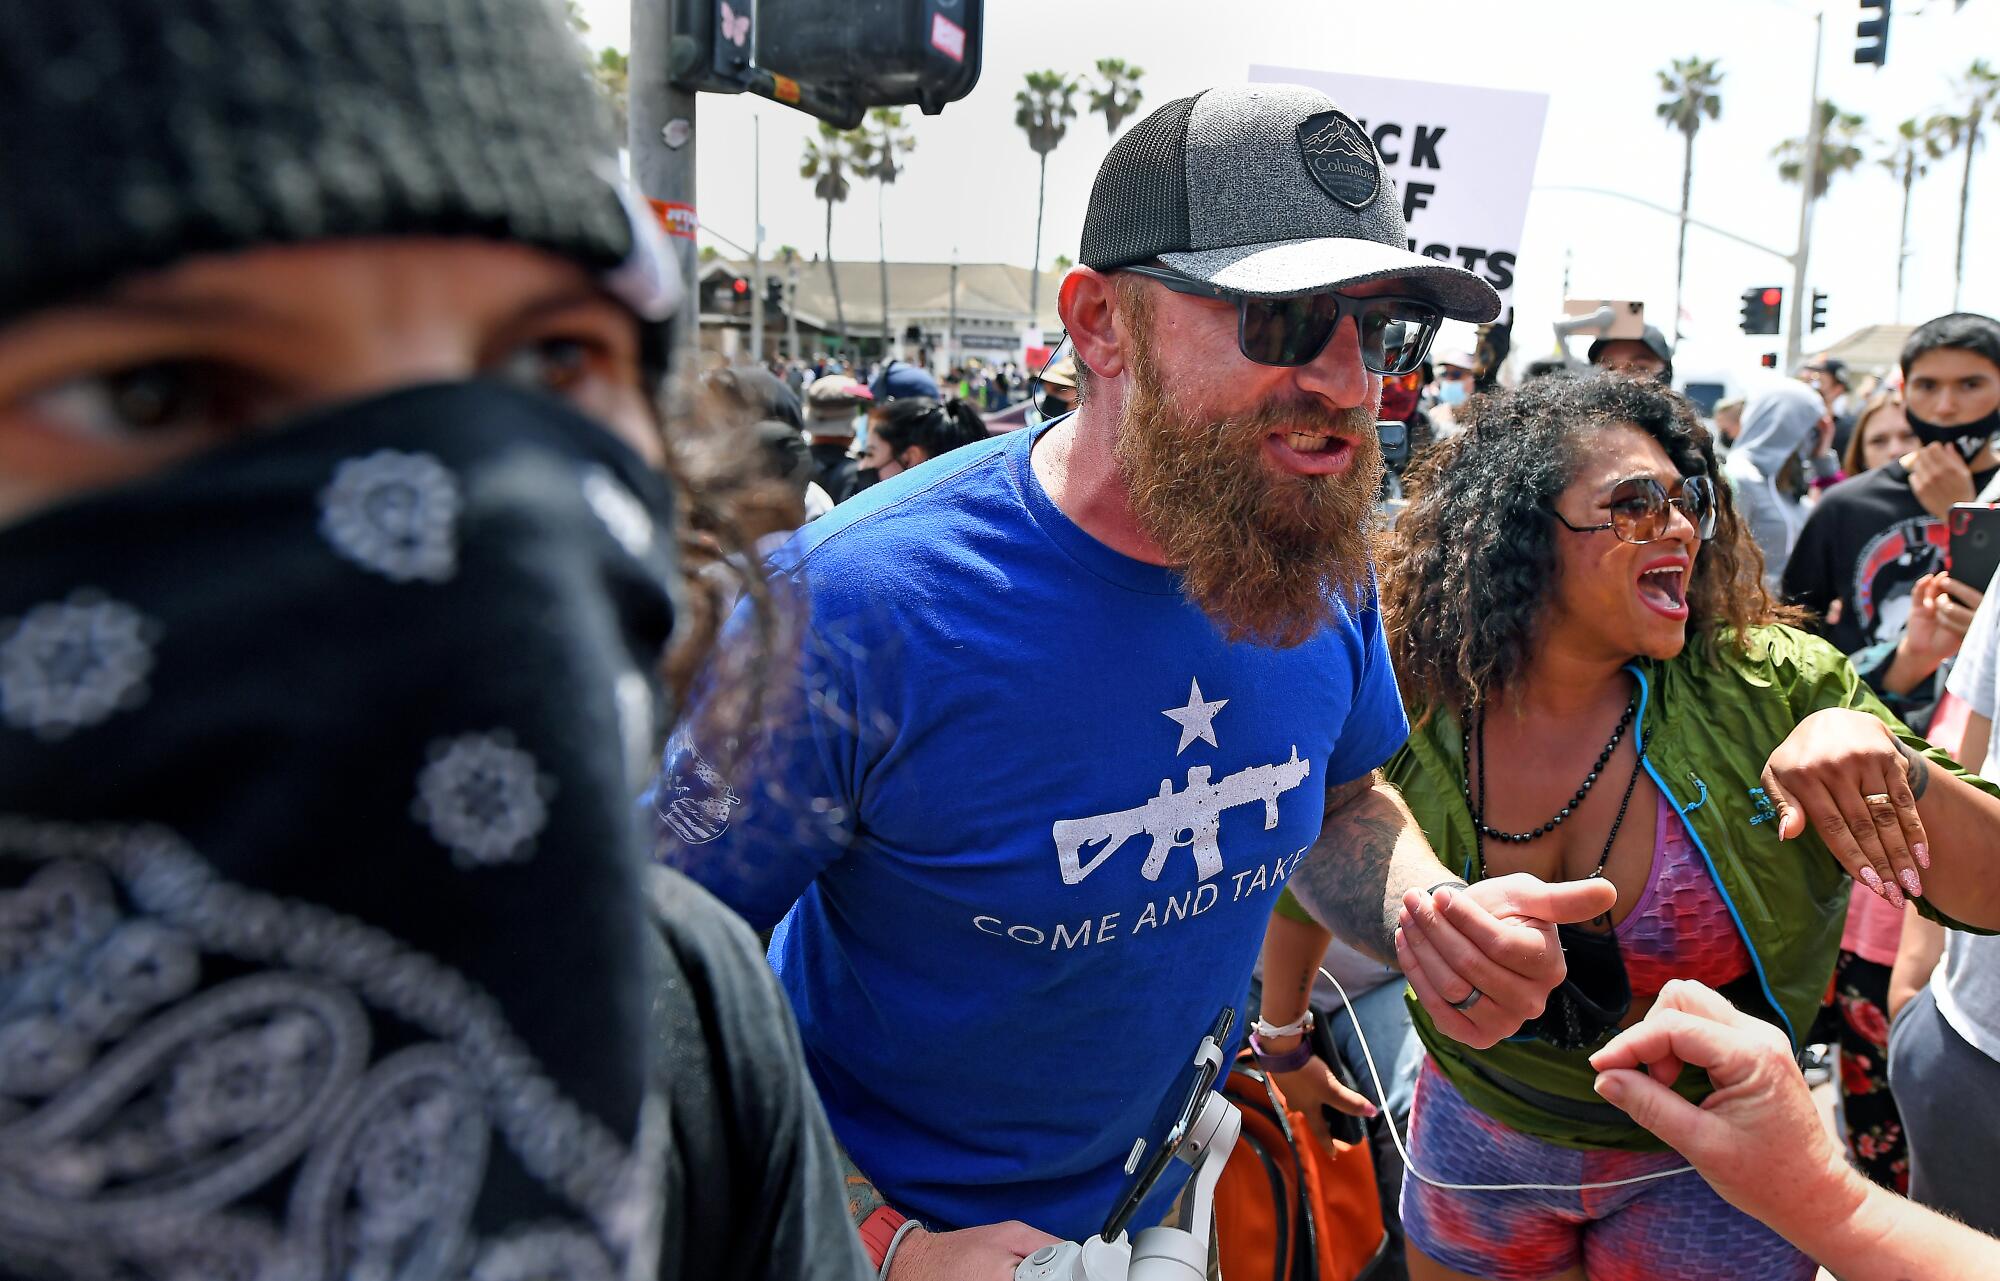 A bearded man with a hat, sunglasses and a T-shirt with a gun graphic on it argues amid a crowd.